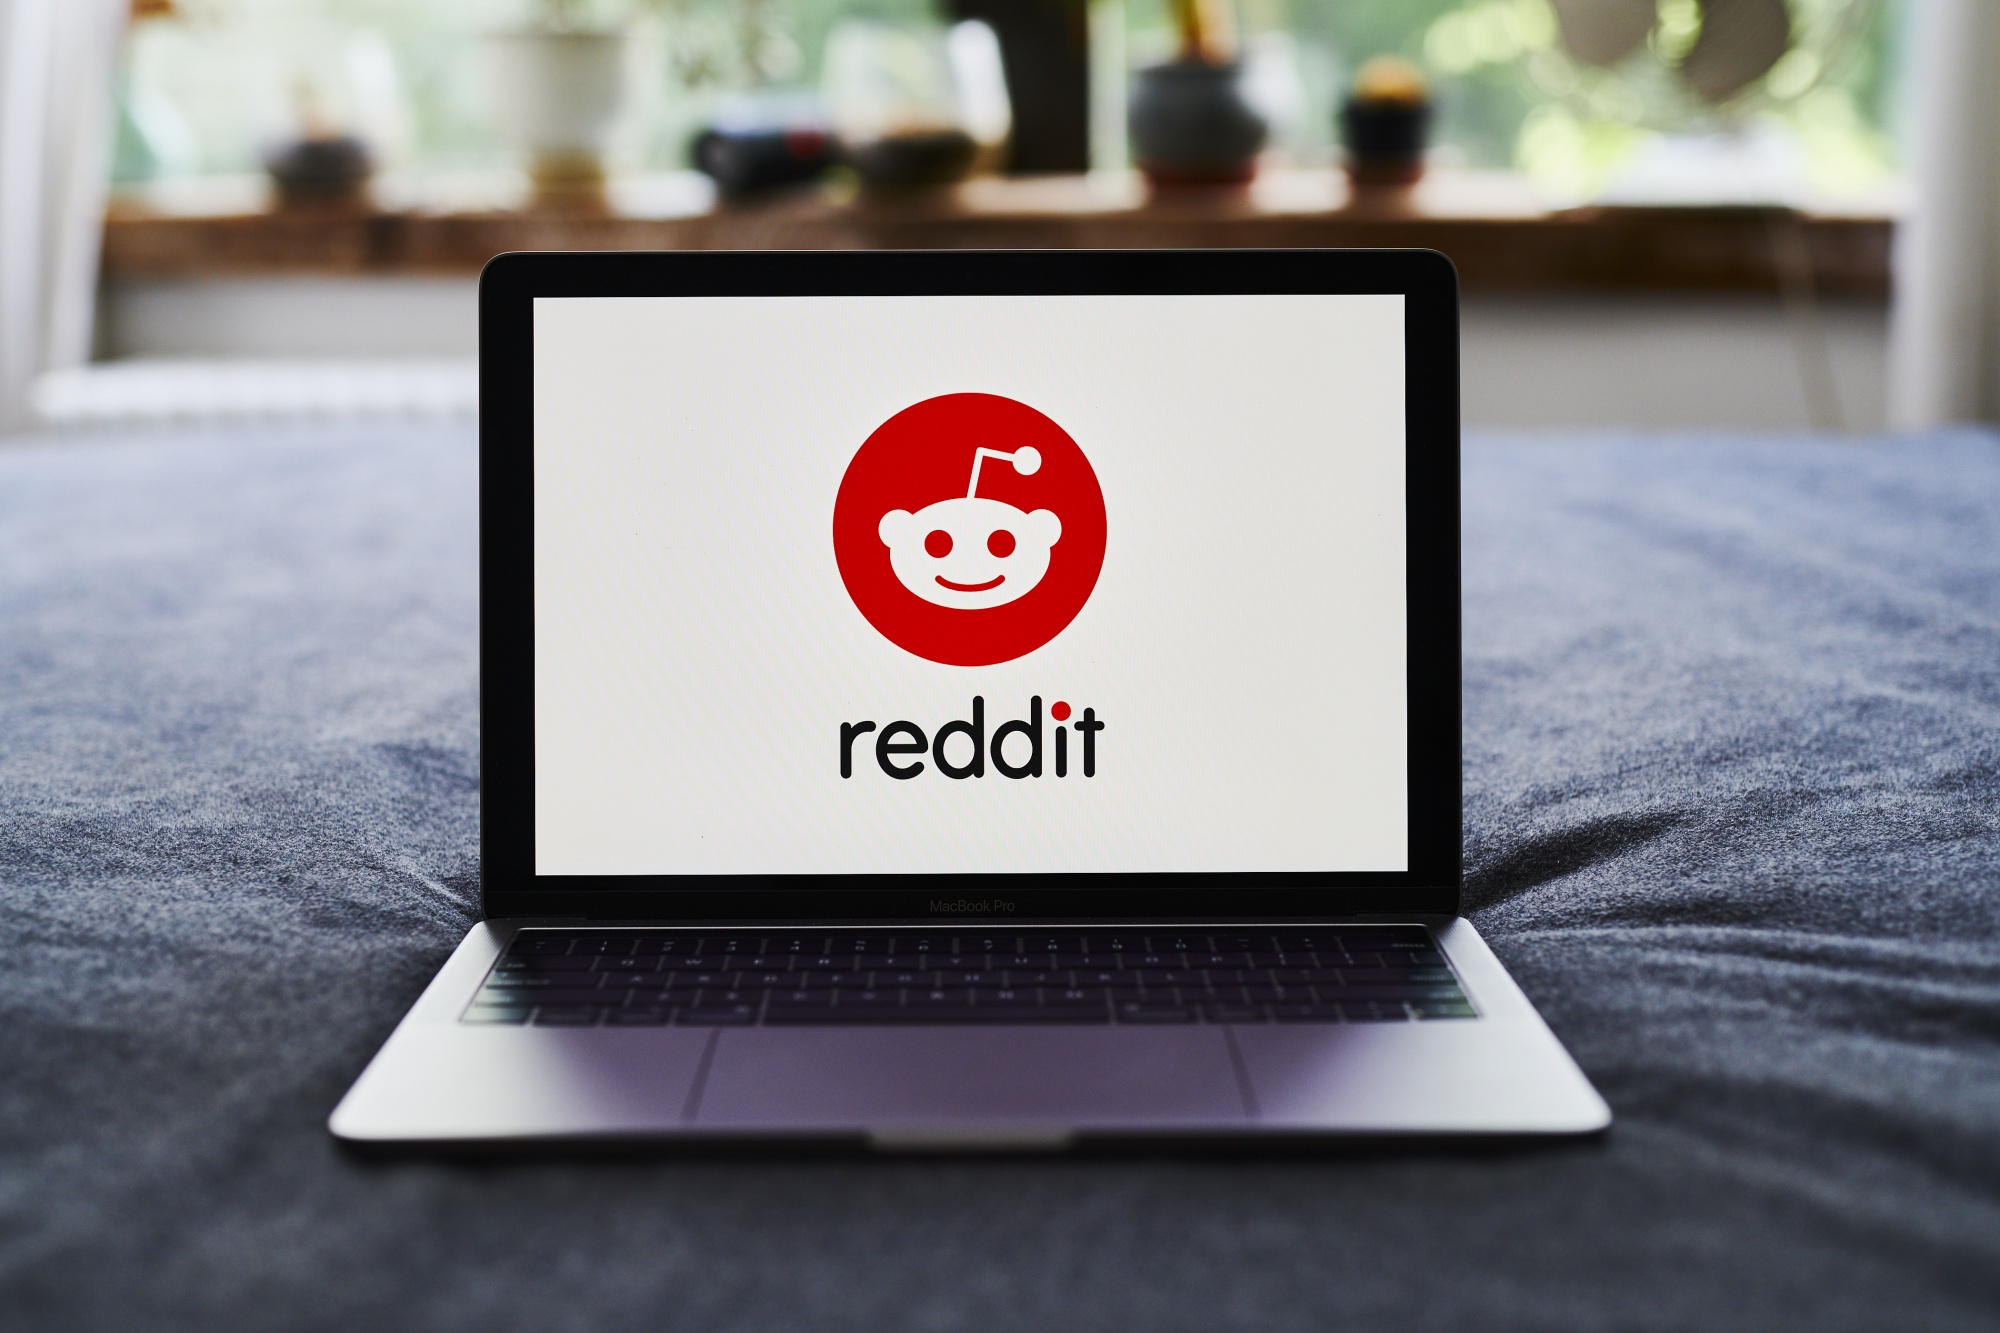 Reddit to Cut 5% of Staff and Trim Hiring Goals in Restructuring